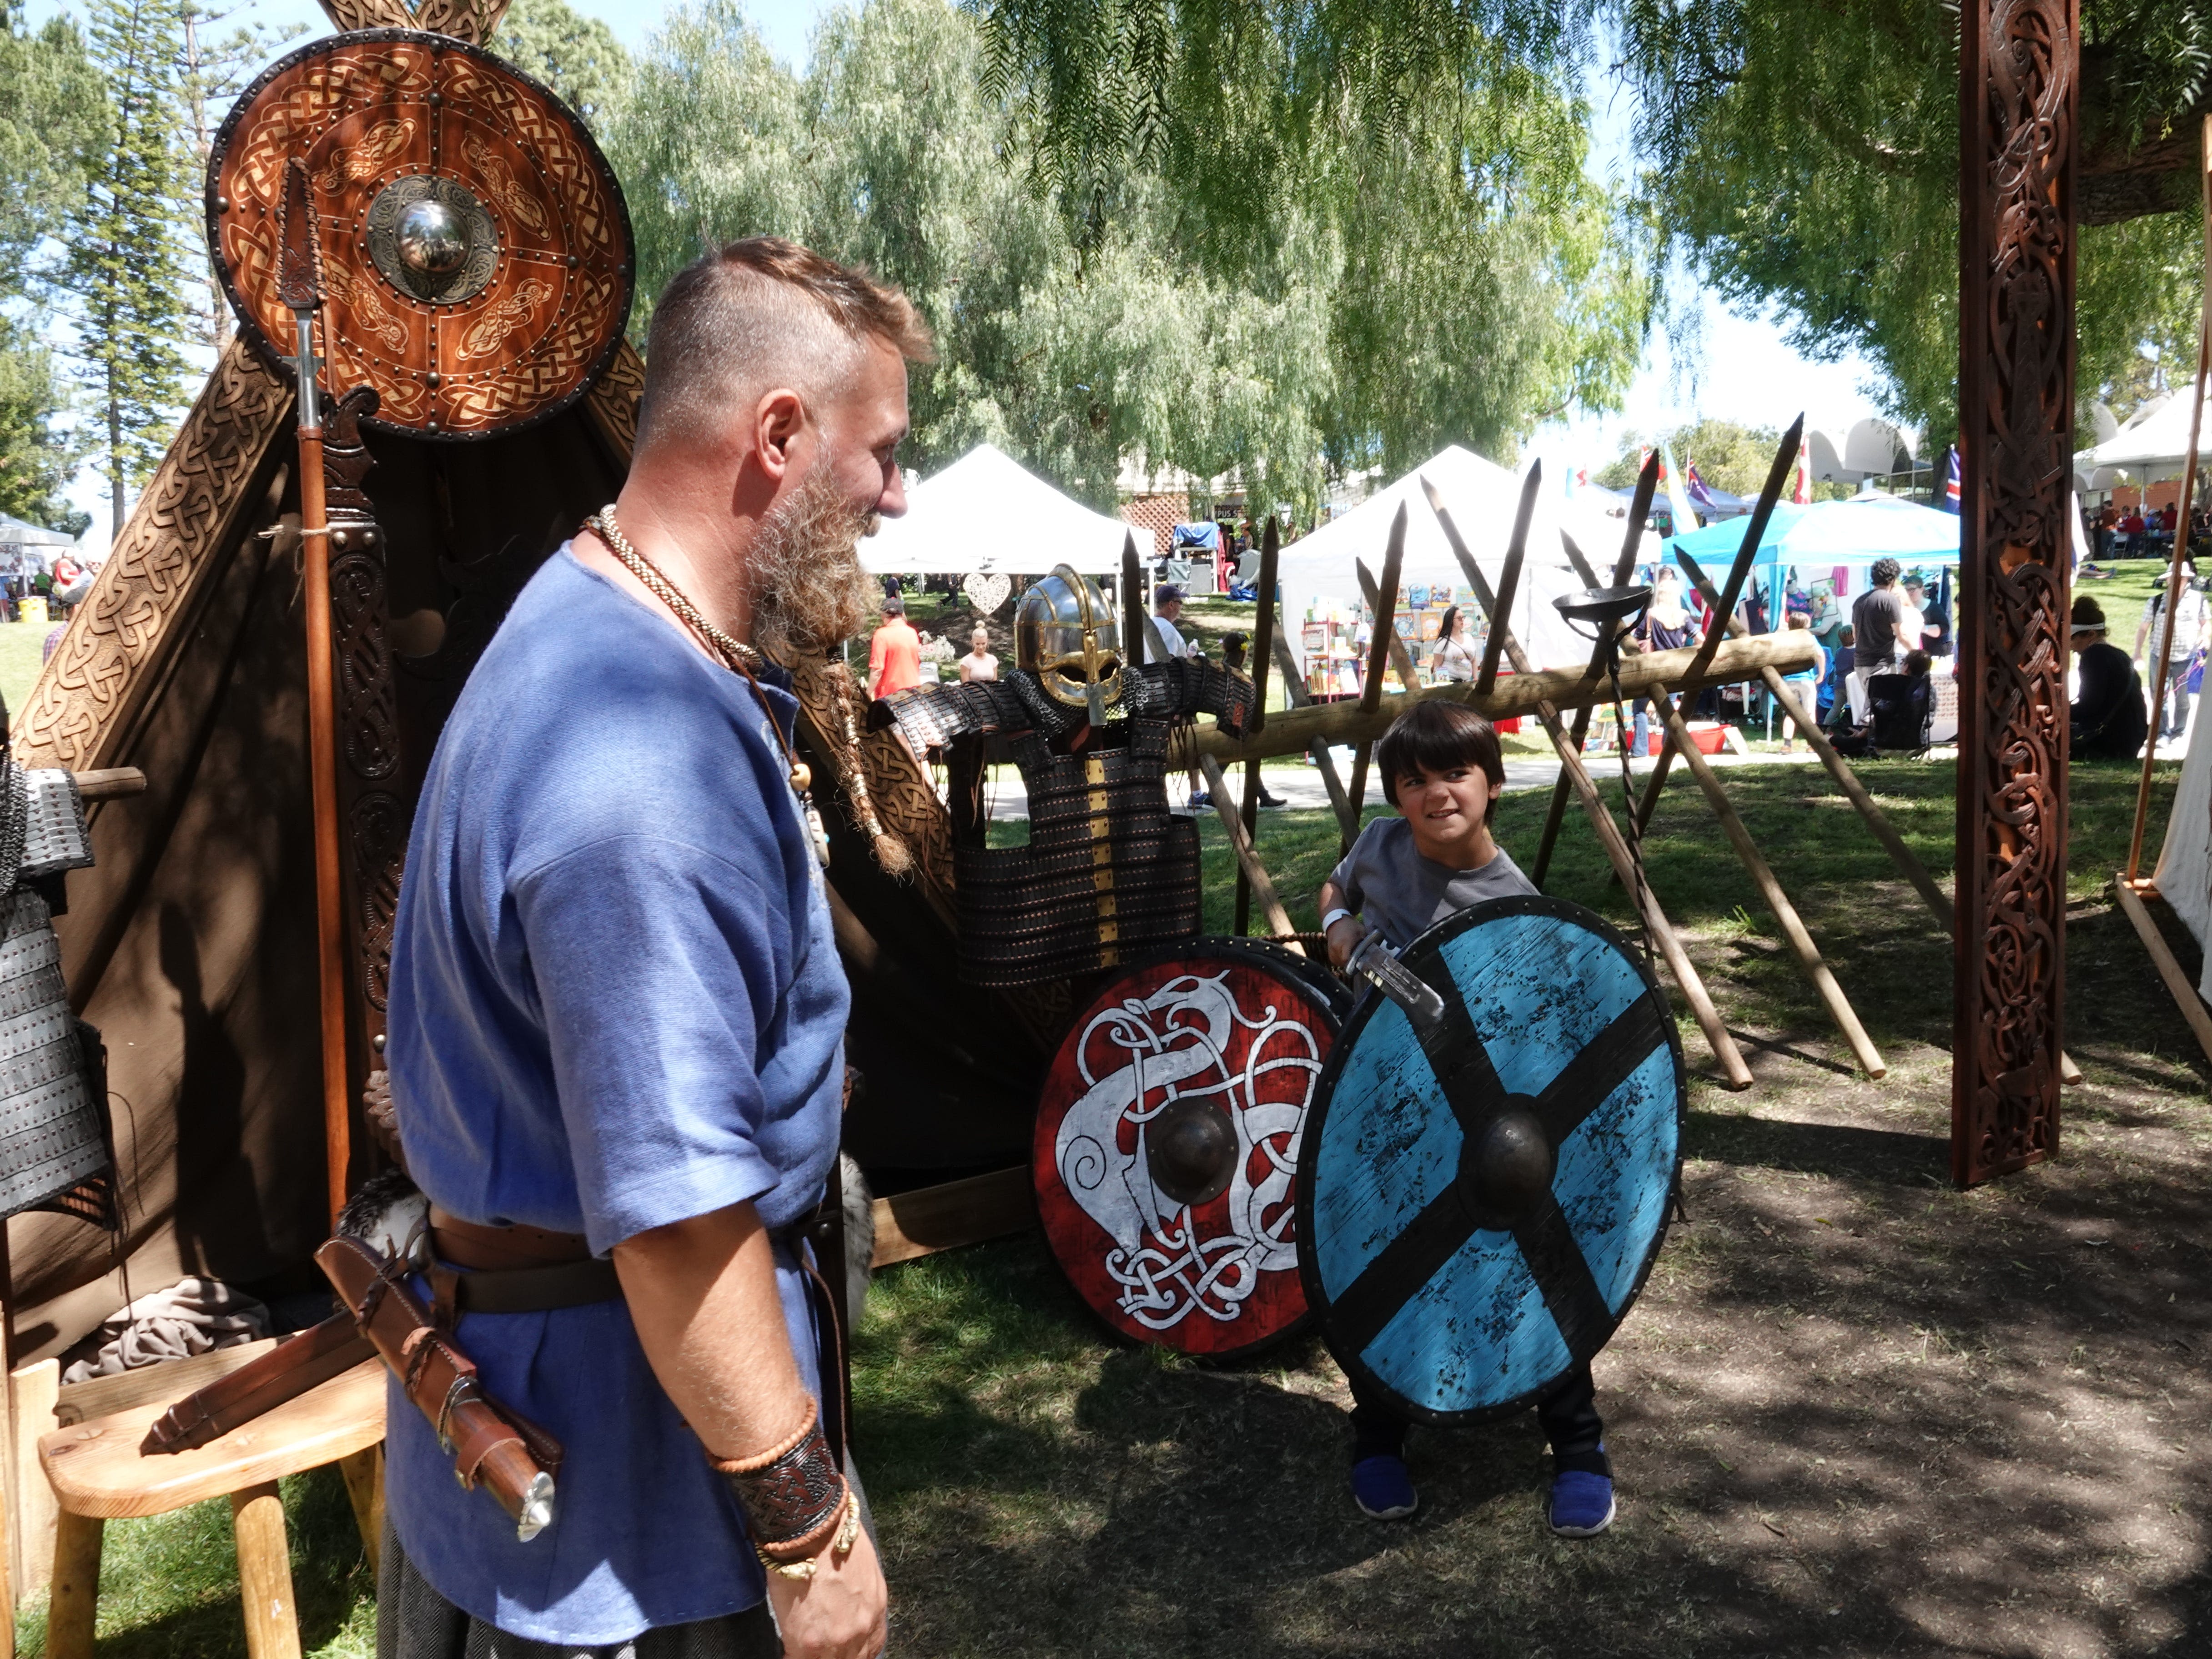 Scandinavian Festival celebrates 50 years with weekend event at CLU